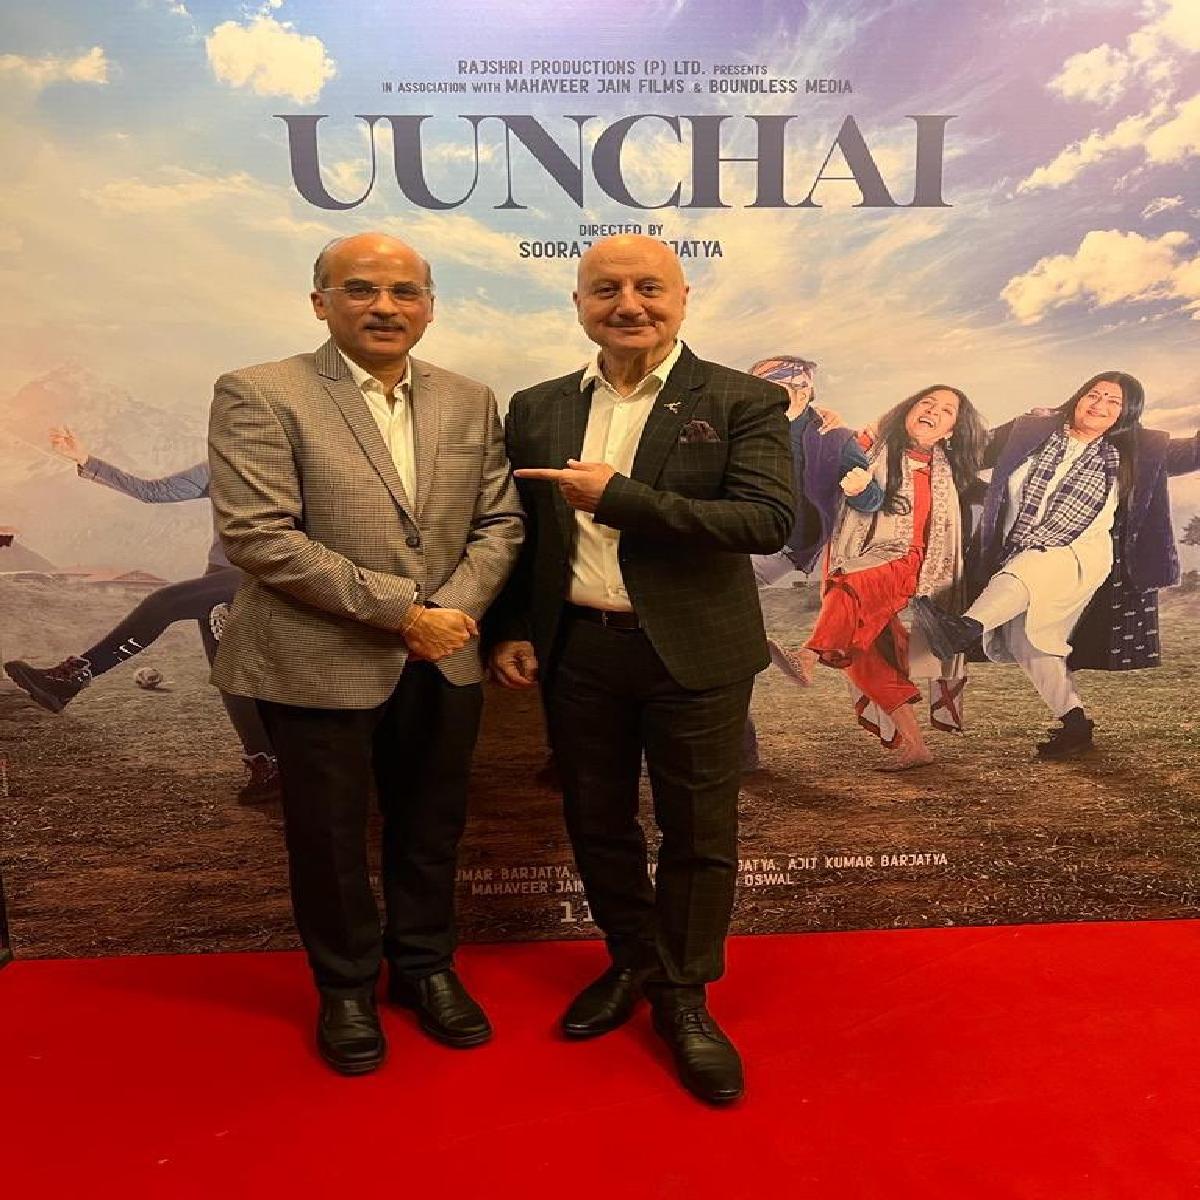 Anupam Kher Will Host Mega Premiere Of Uunchai To Celebrate 7th Anniversary Of Rajshri Productions